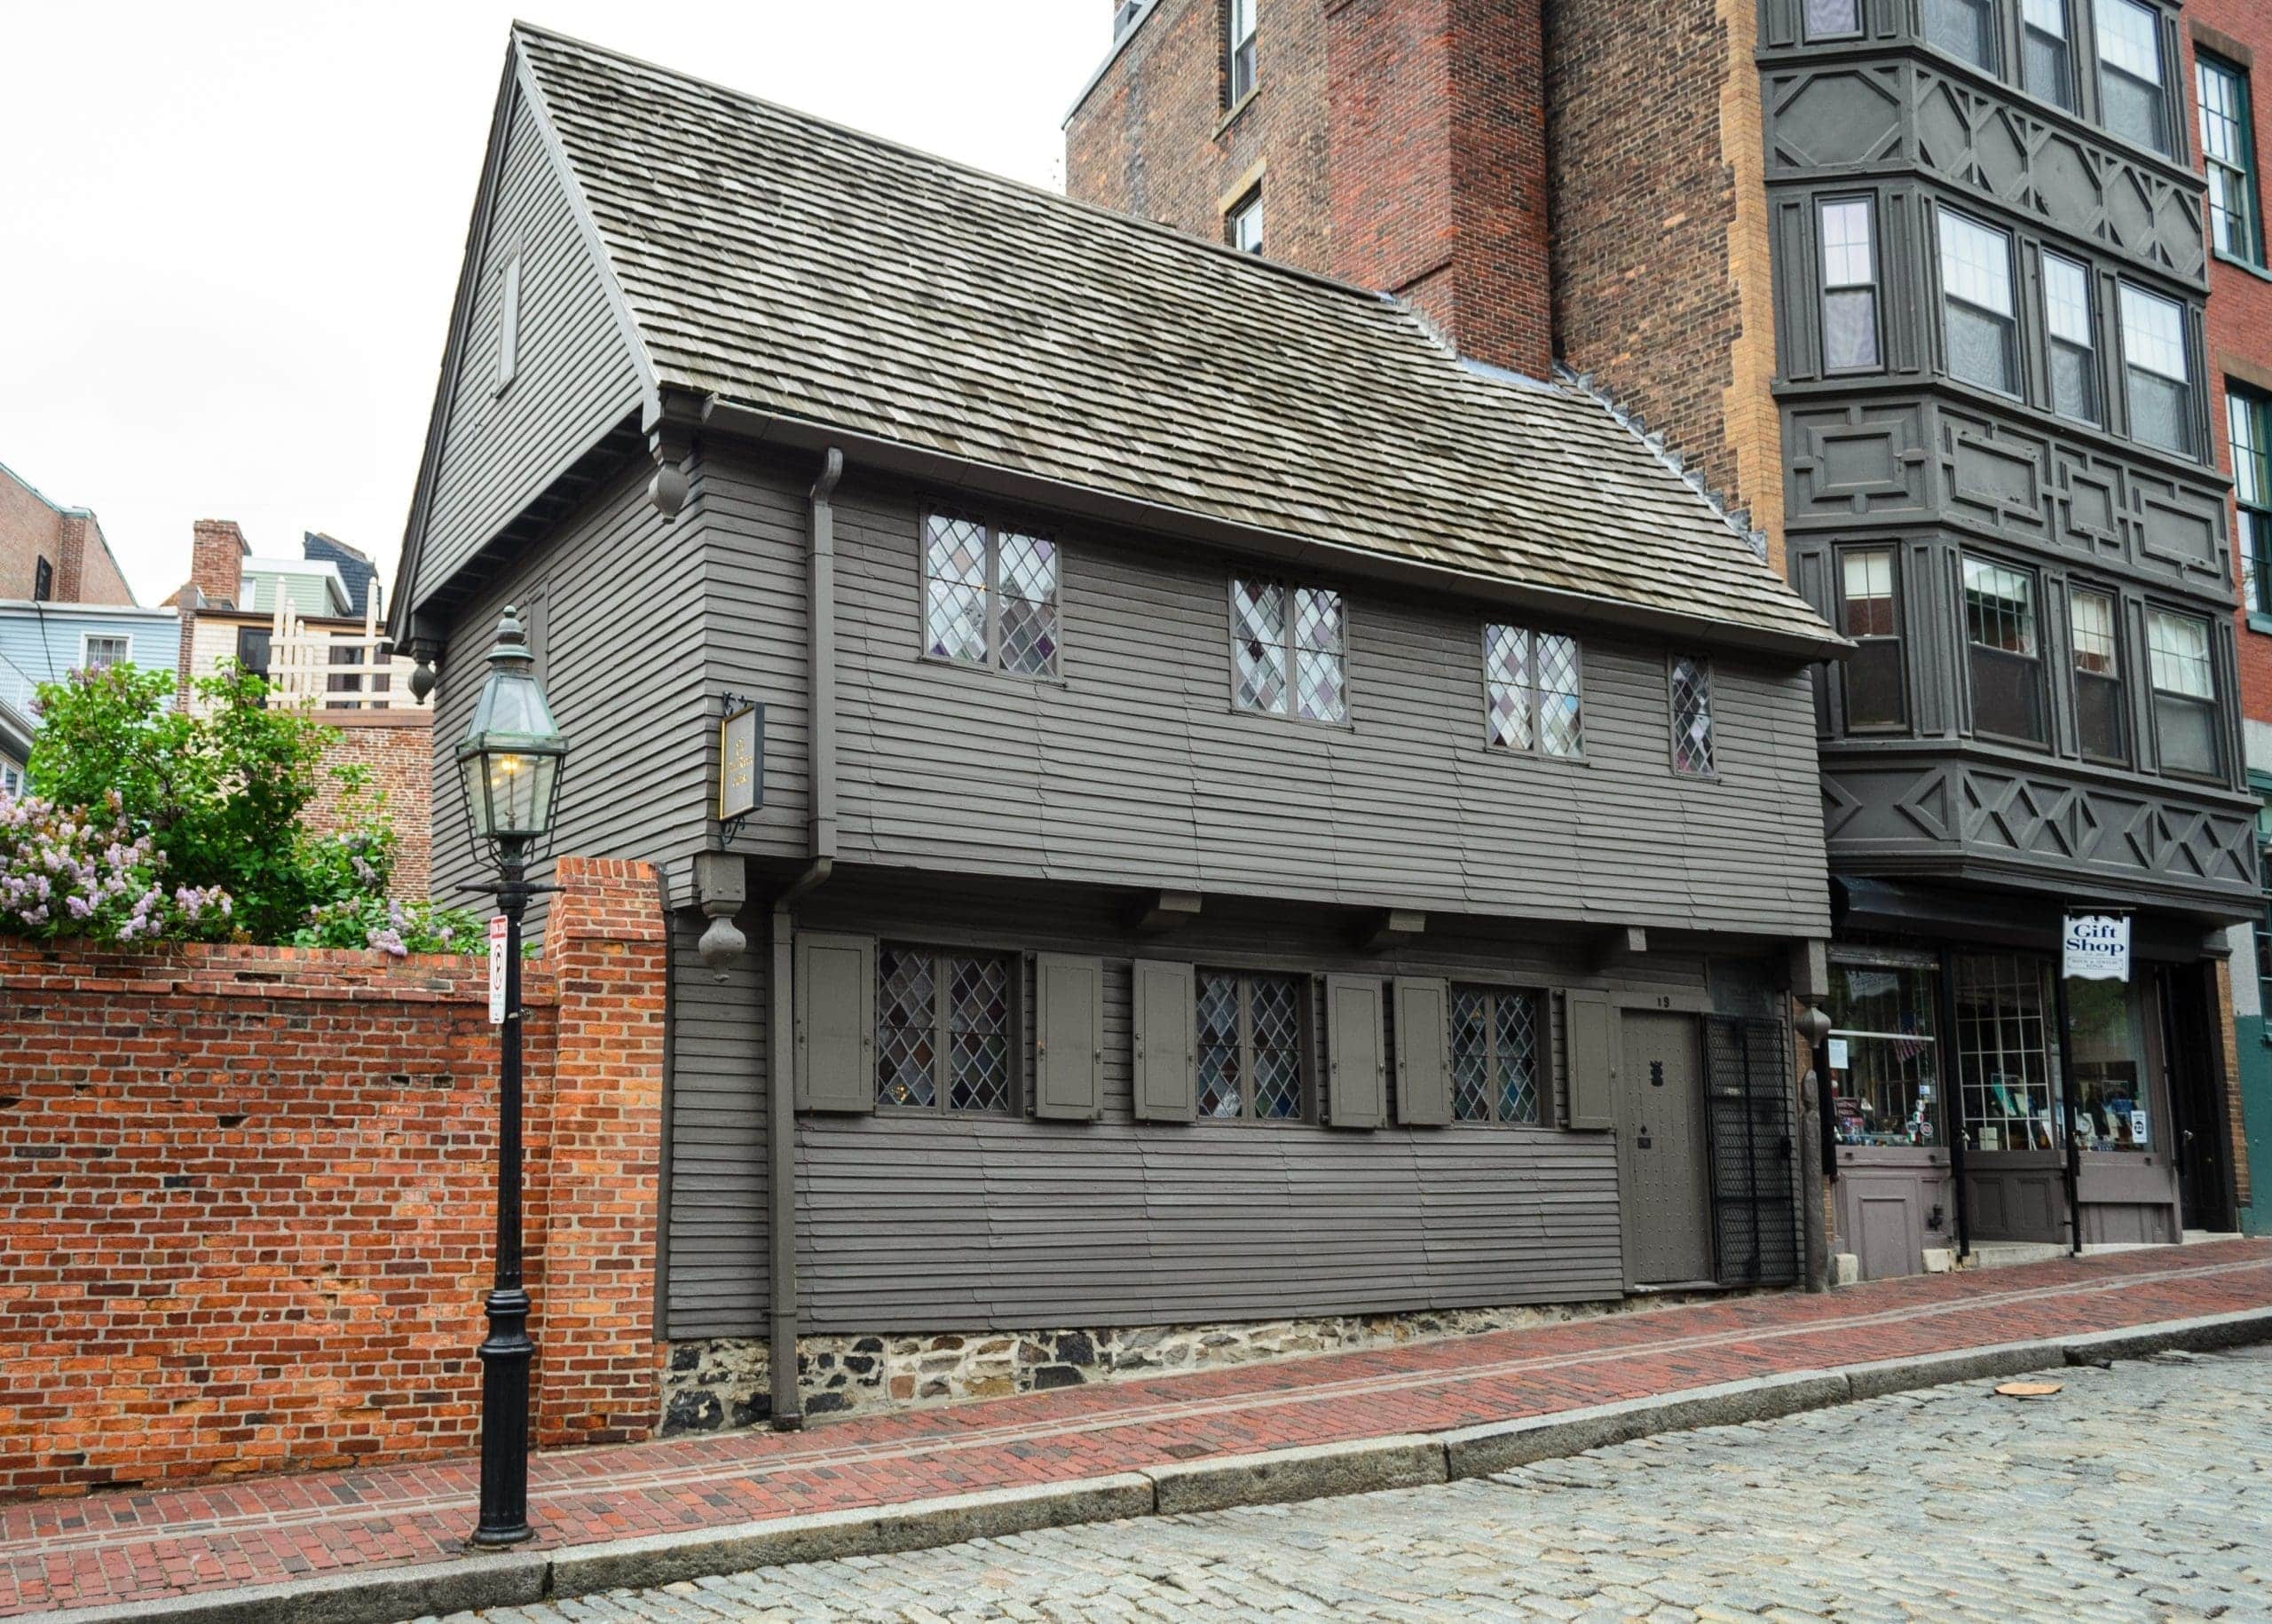 Is Paul Revere’s House on the Freedom Trail?